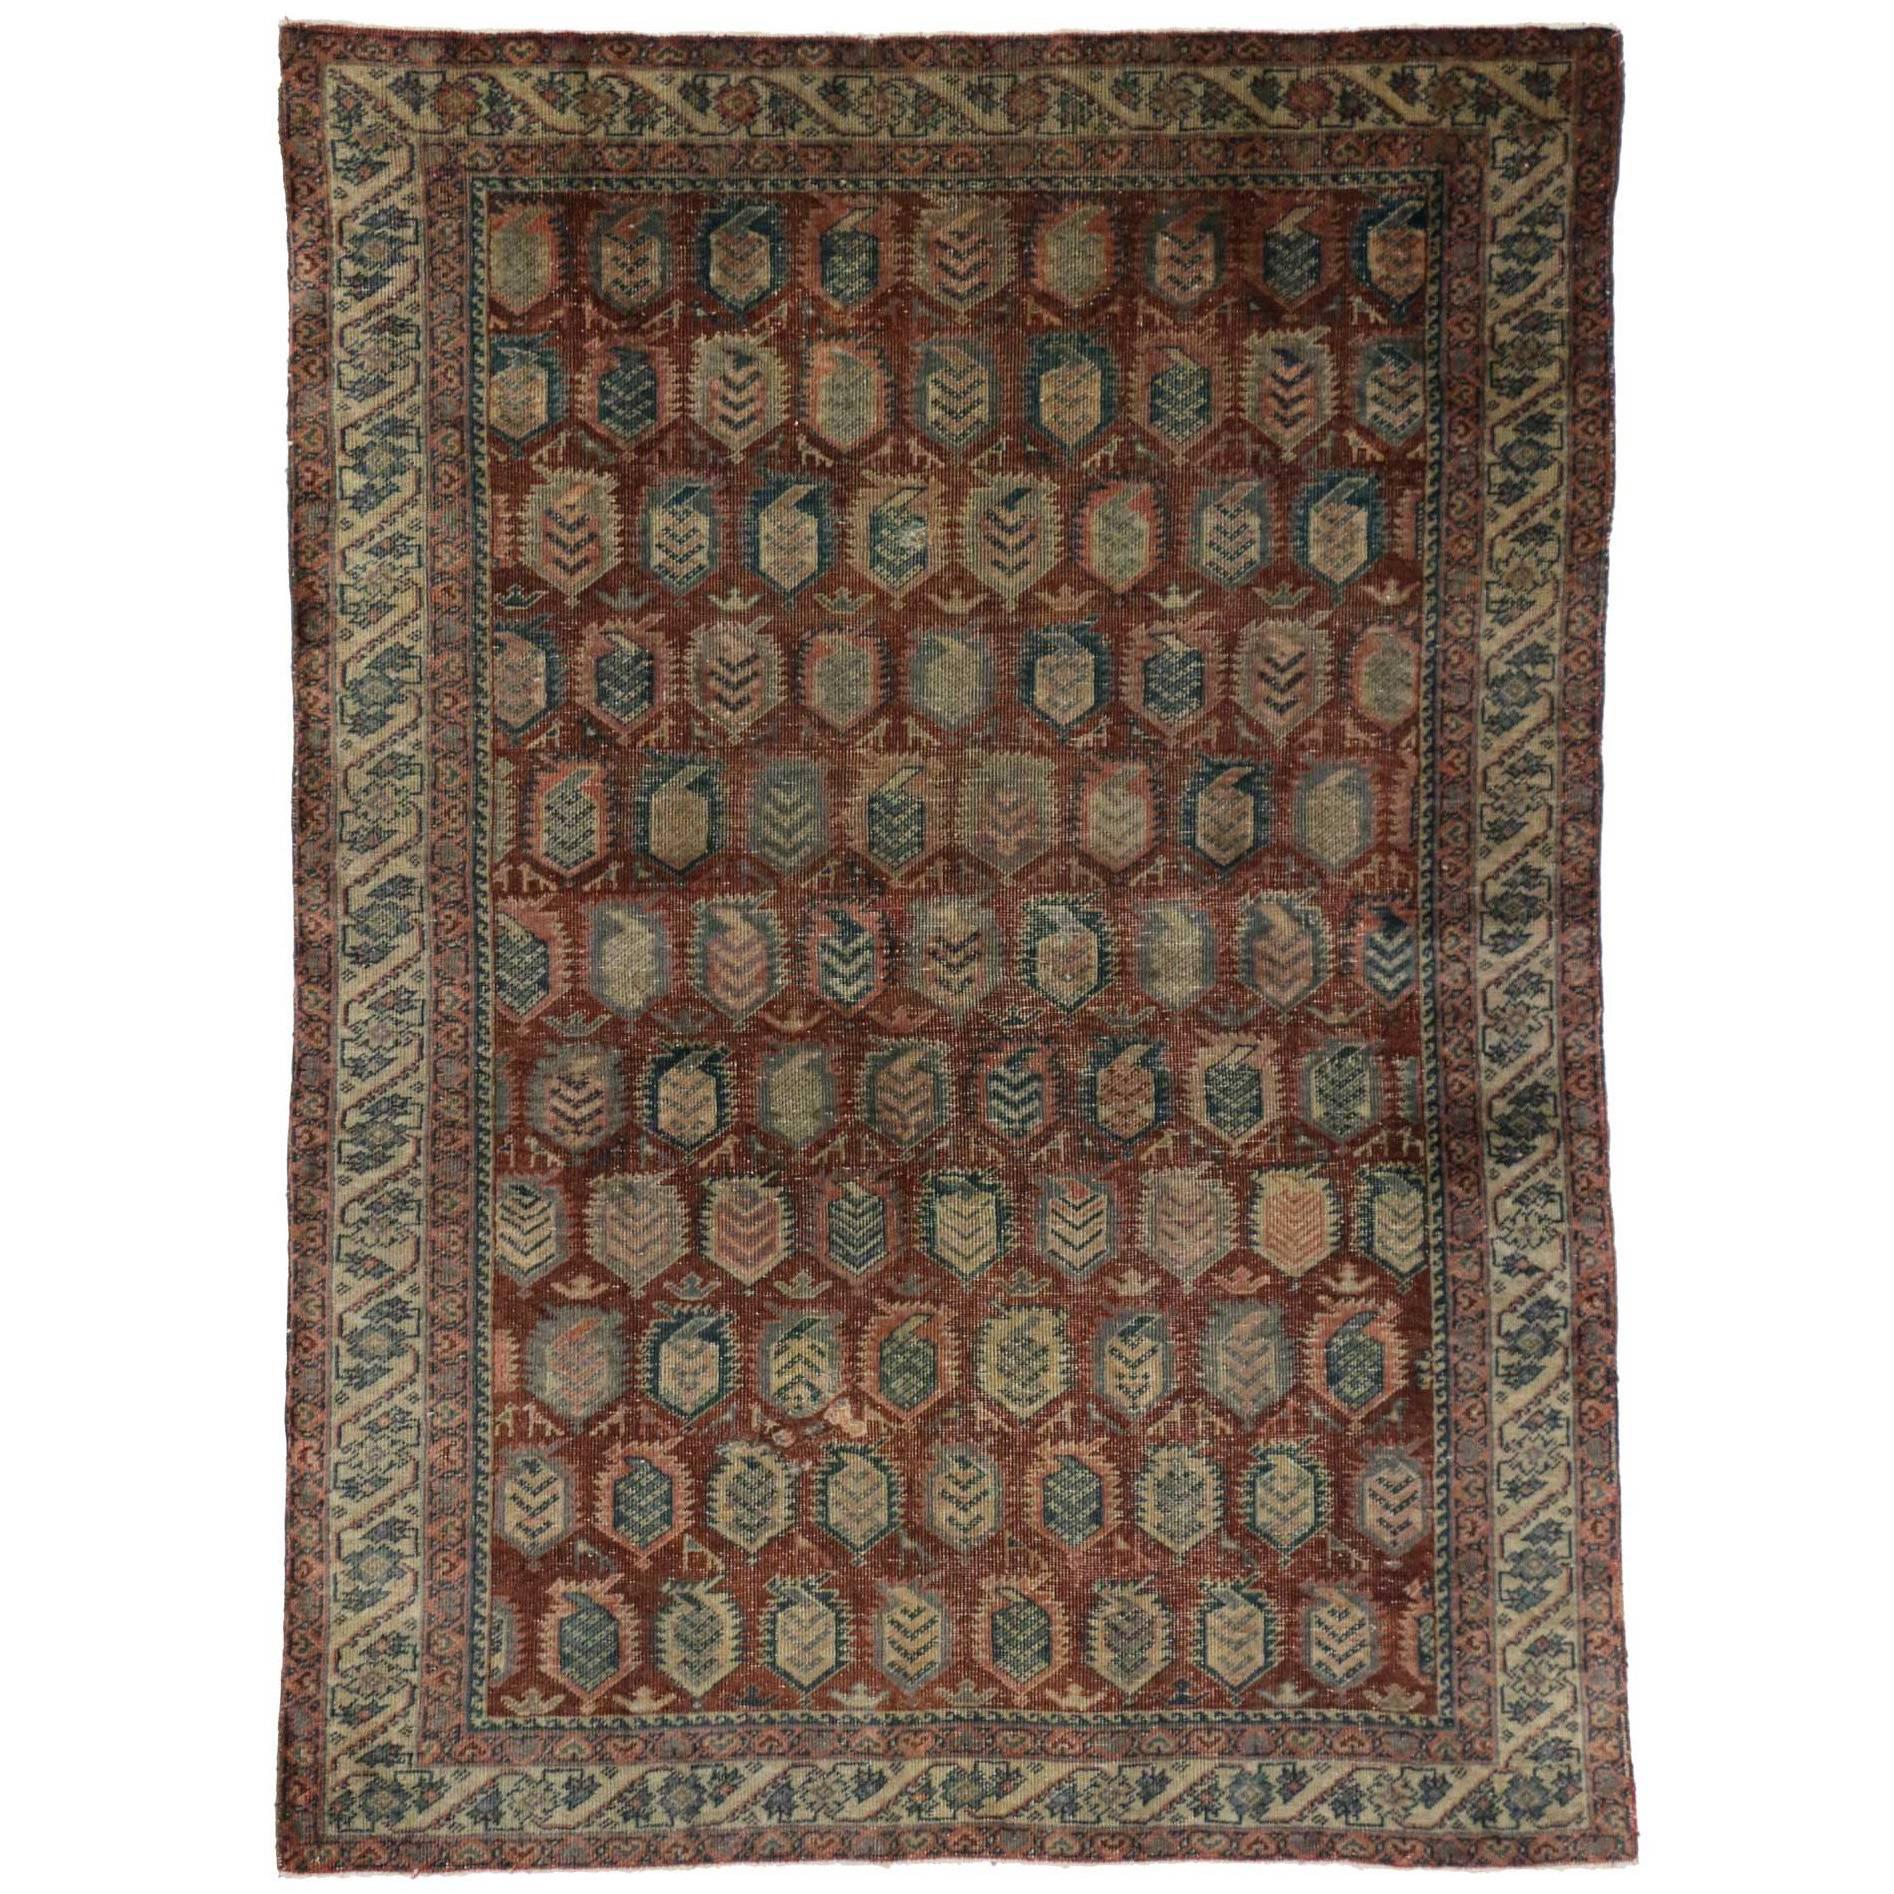 Distressed Vintage Turkish Oushak Accent Rug with Worn Aesthetic